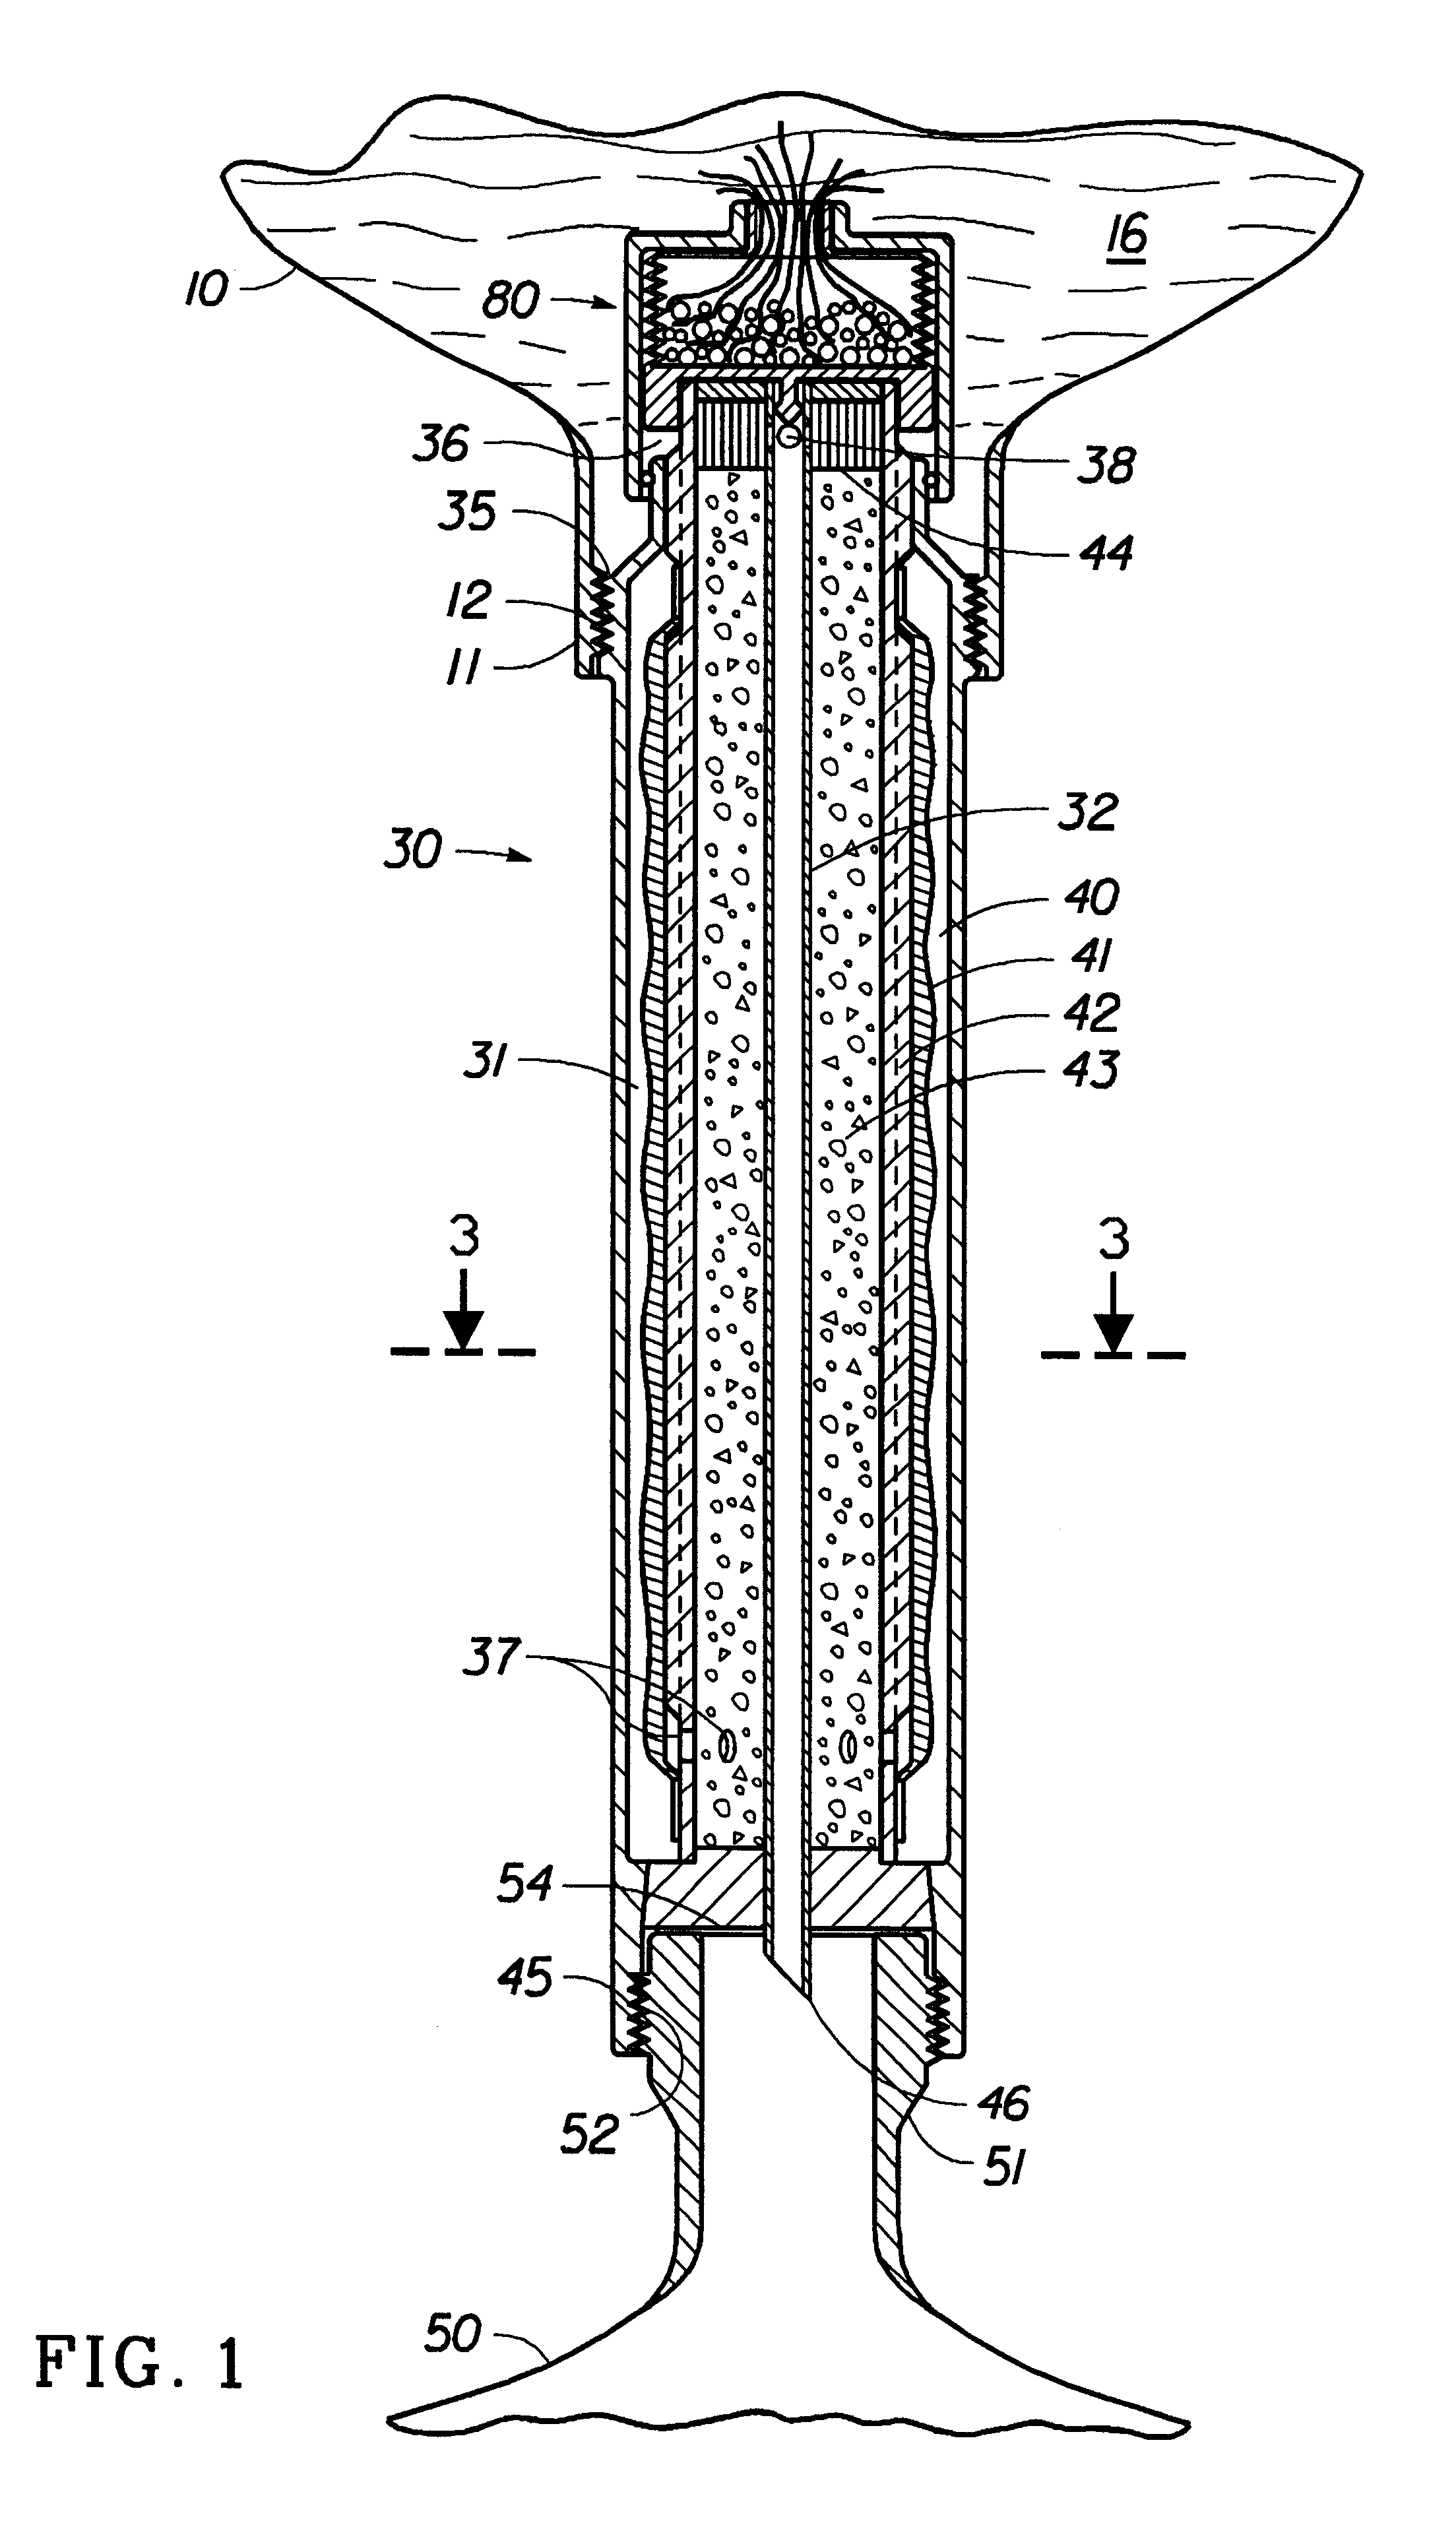 Emergency water treatment device